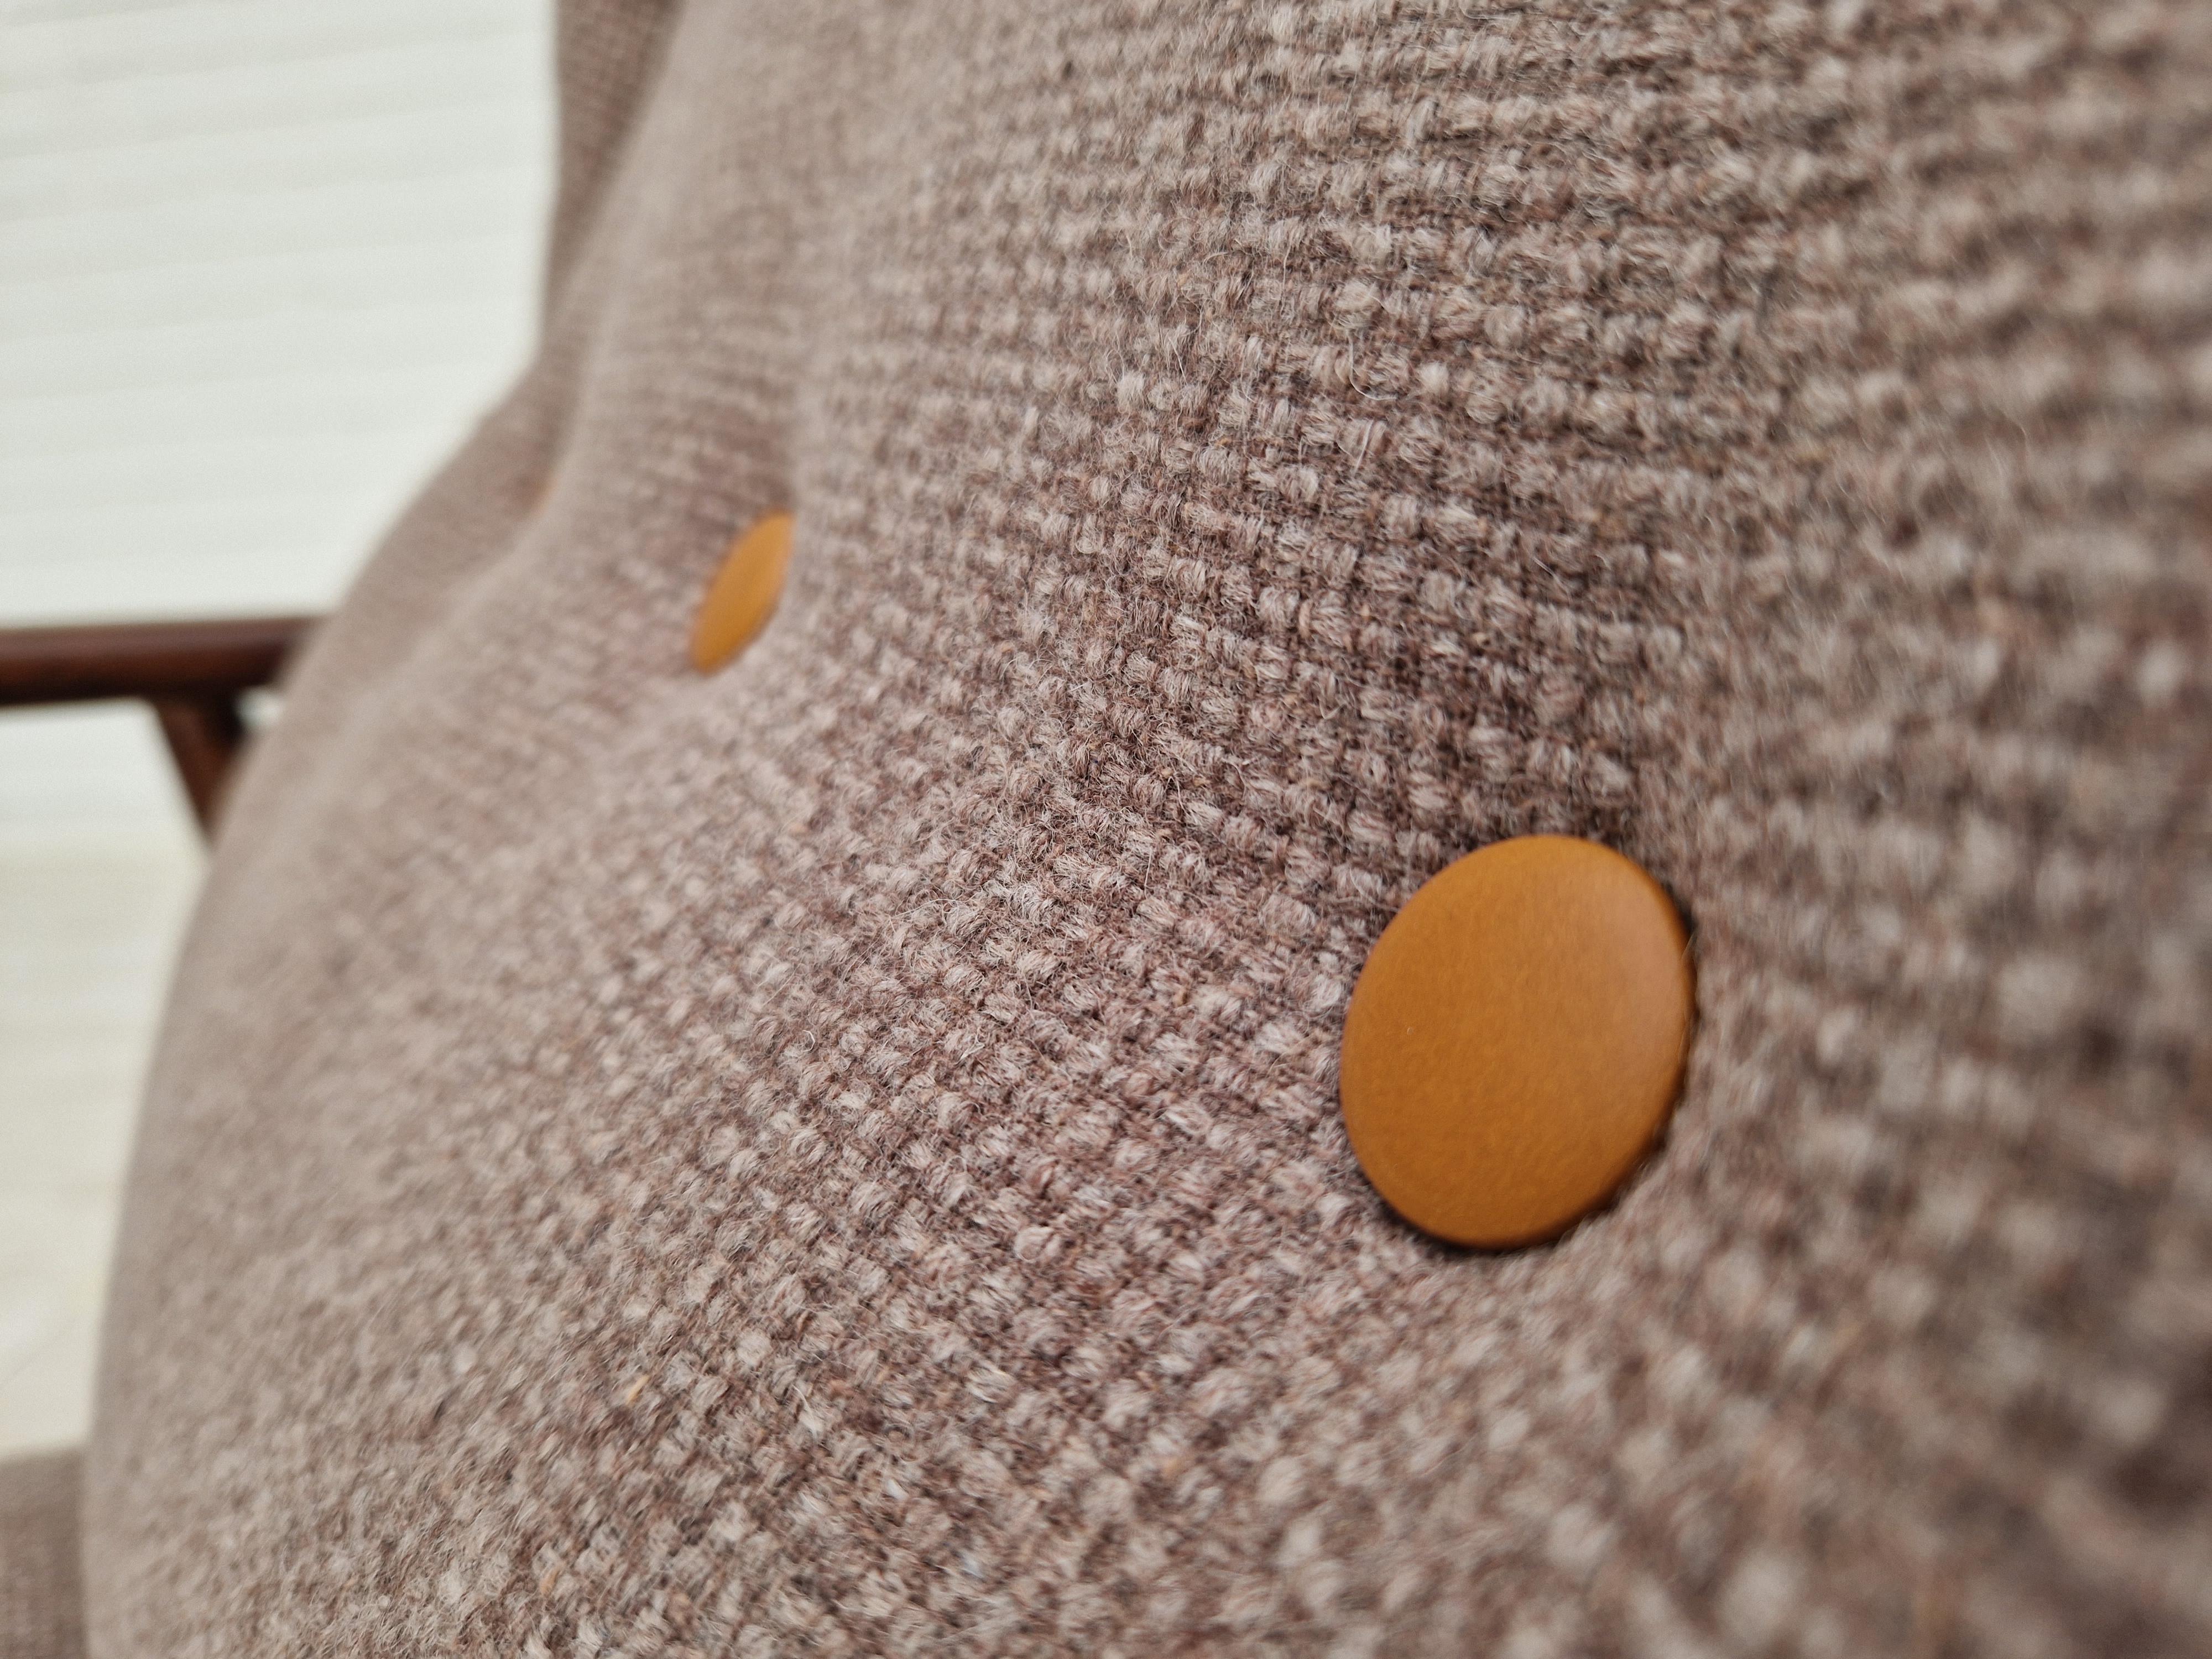 1960s, Swedish design. Completely renovated-reupholstered armchair. Upholstered in quality Nevotex beige furniture wool fabric. Cognac leather buttons. New upholstery with natural coconut mat. Renewed legs and armrests made of beech wood. Original